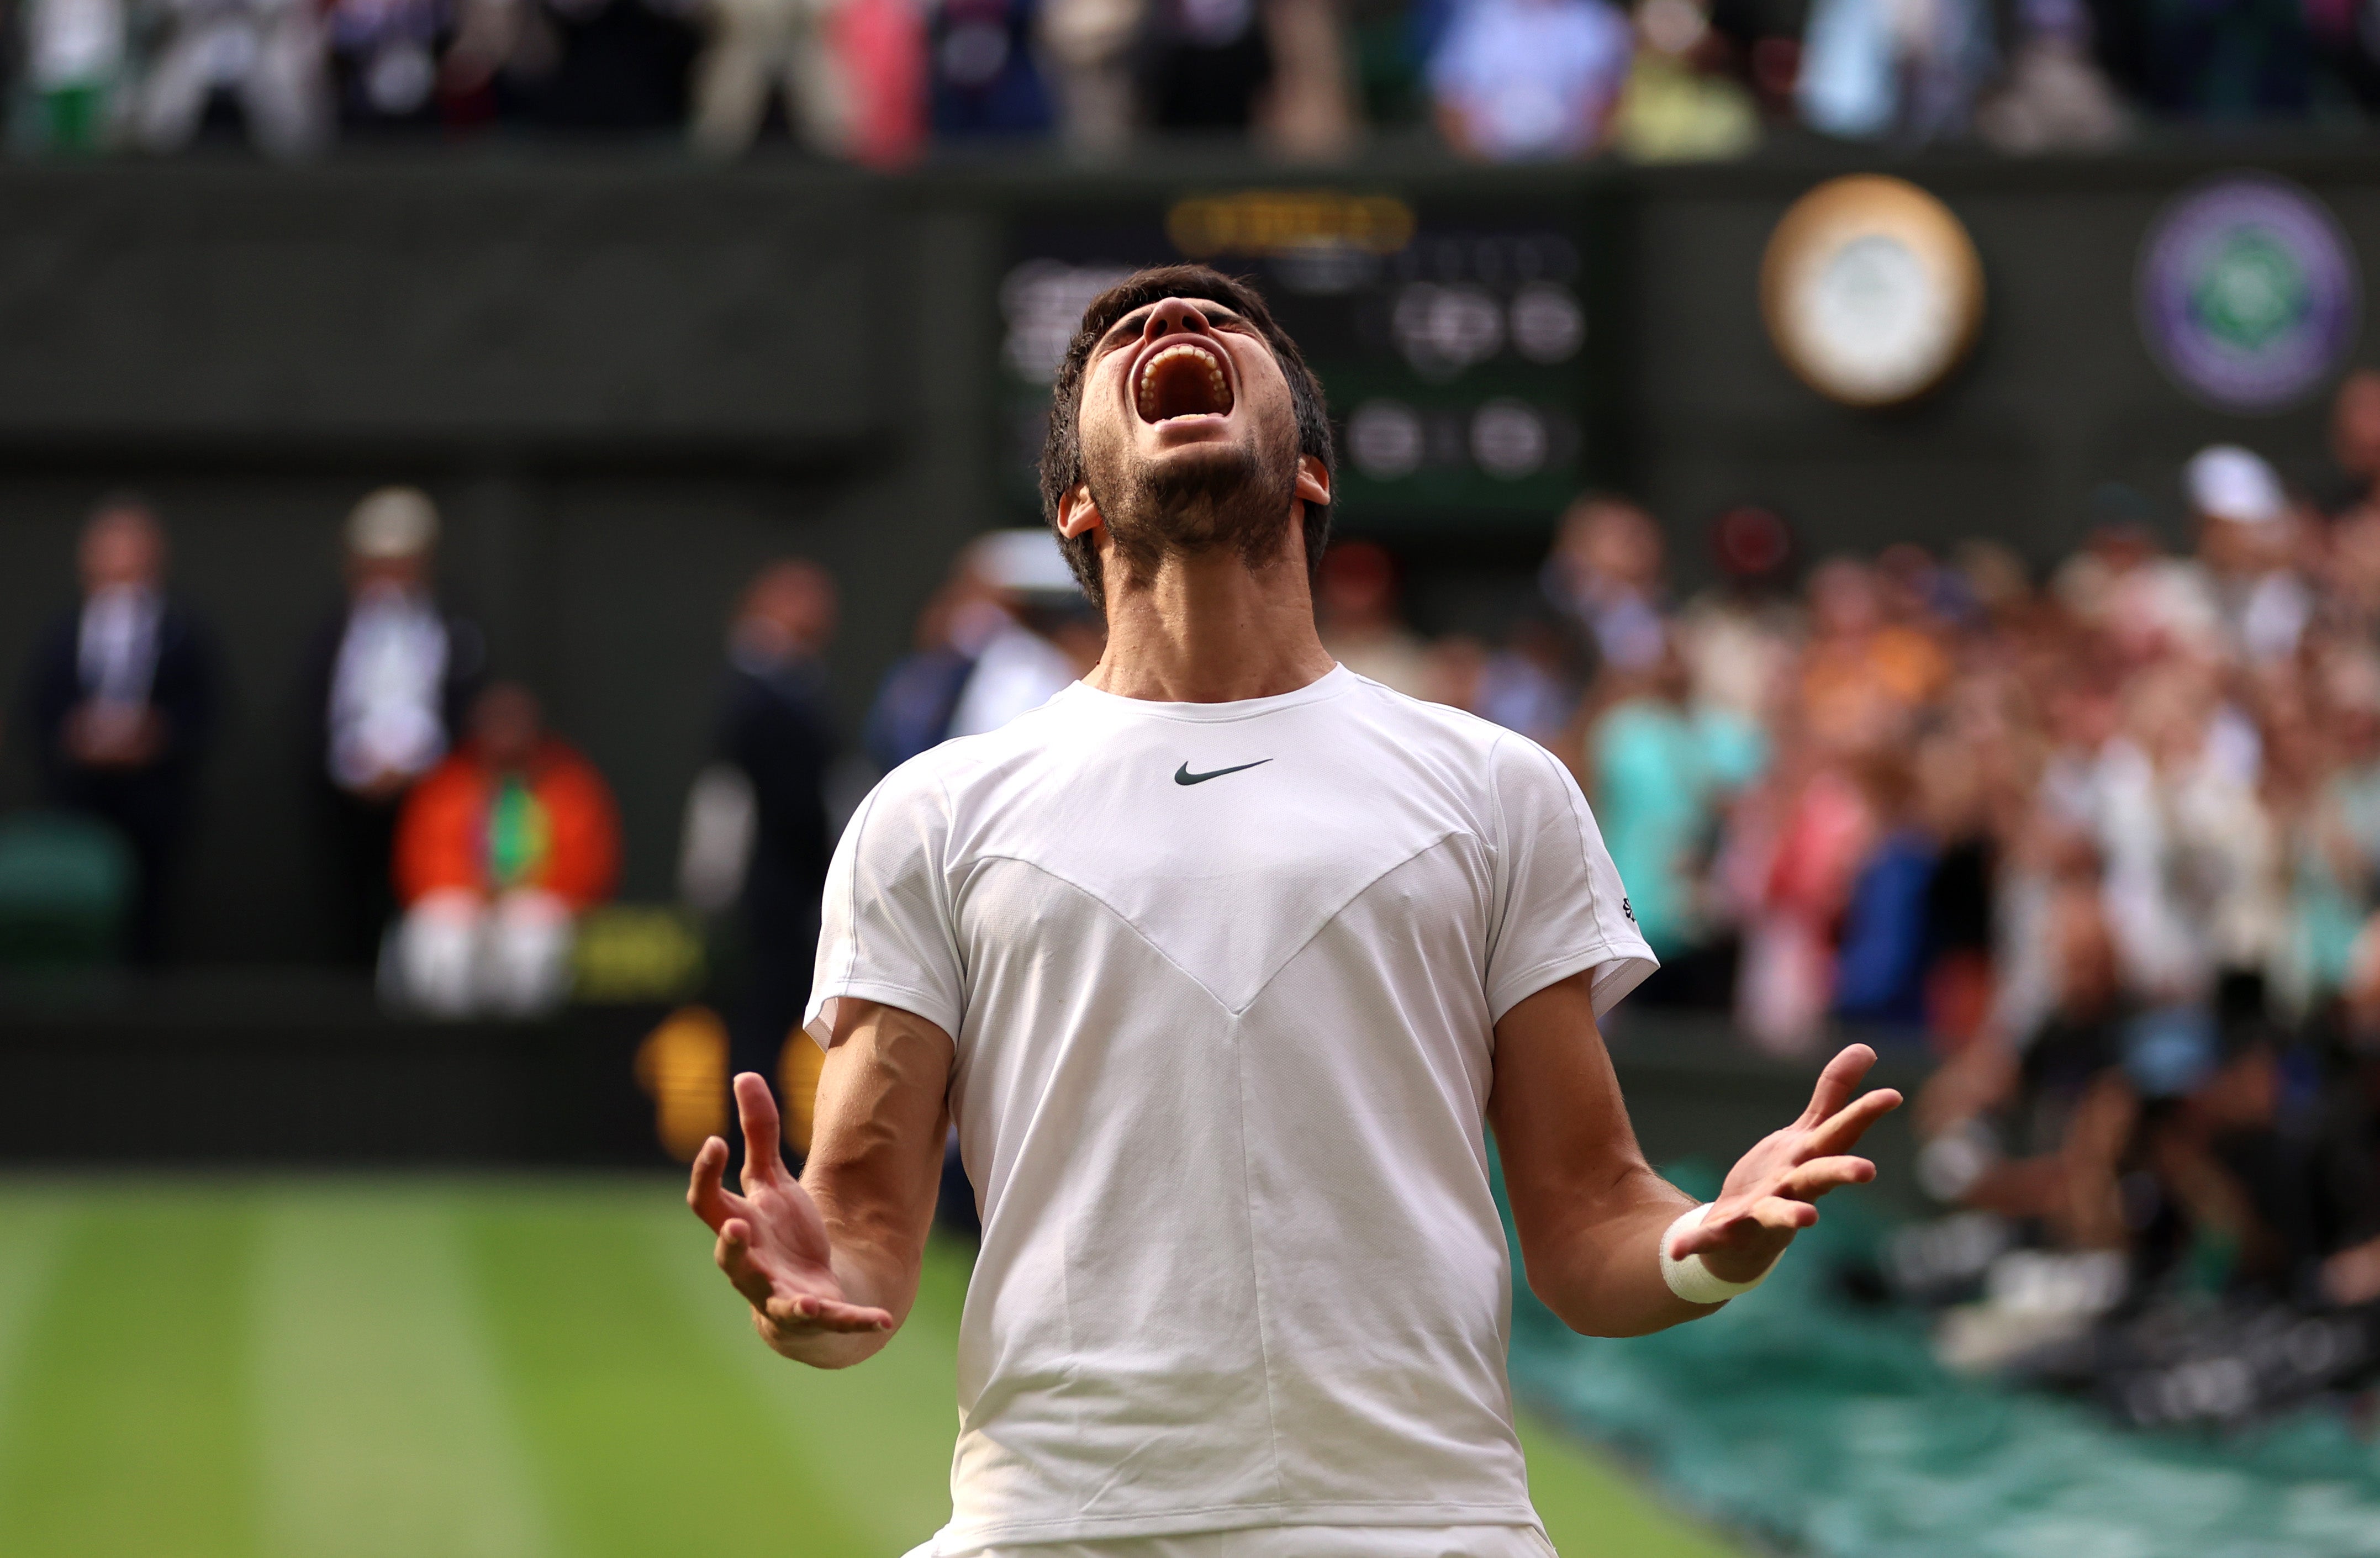 Carlos Alcaraz captures the impossible and now Wimbledon will never be